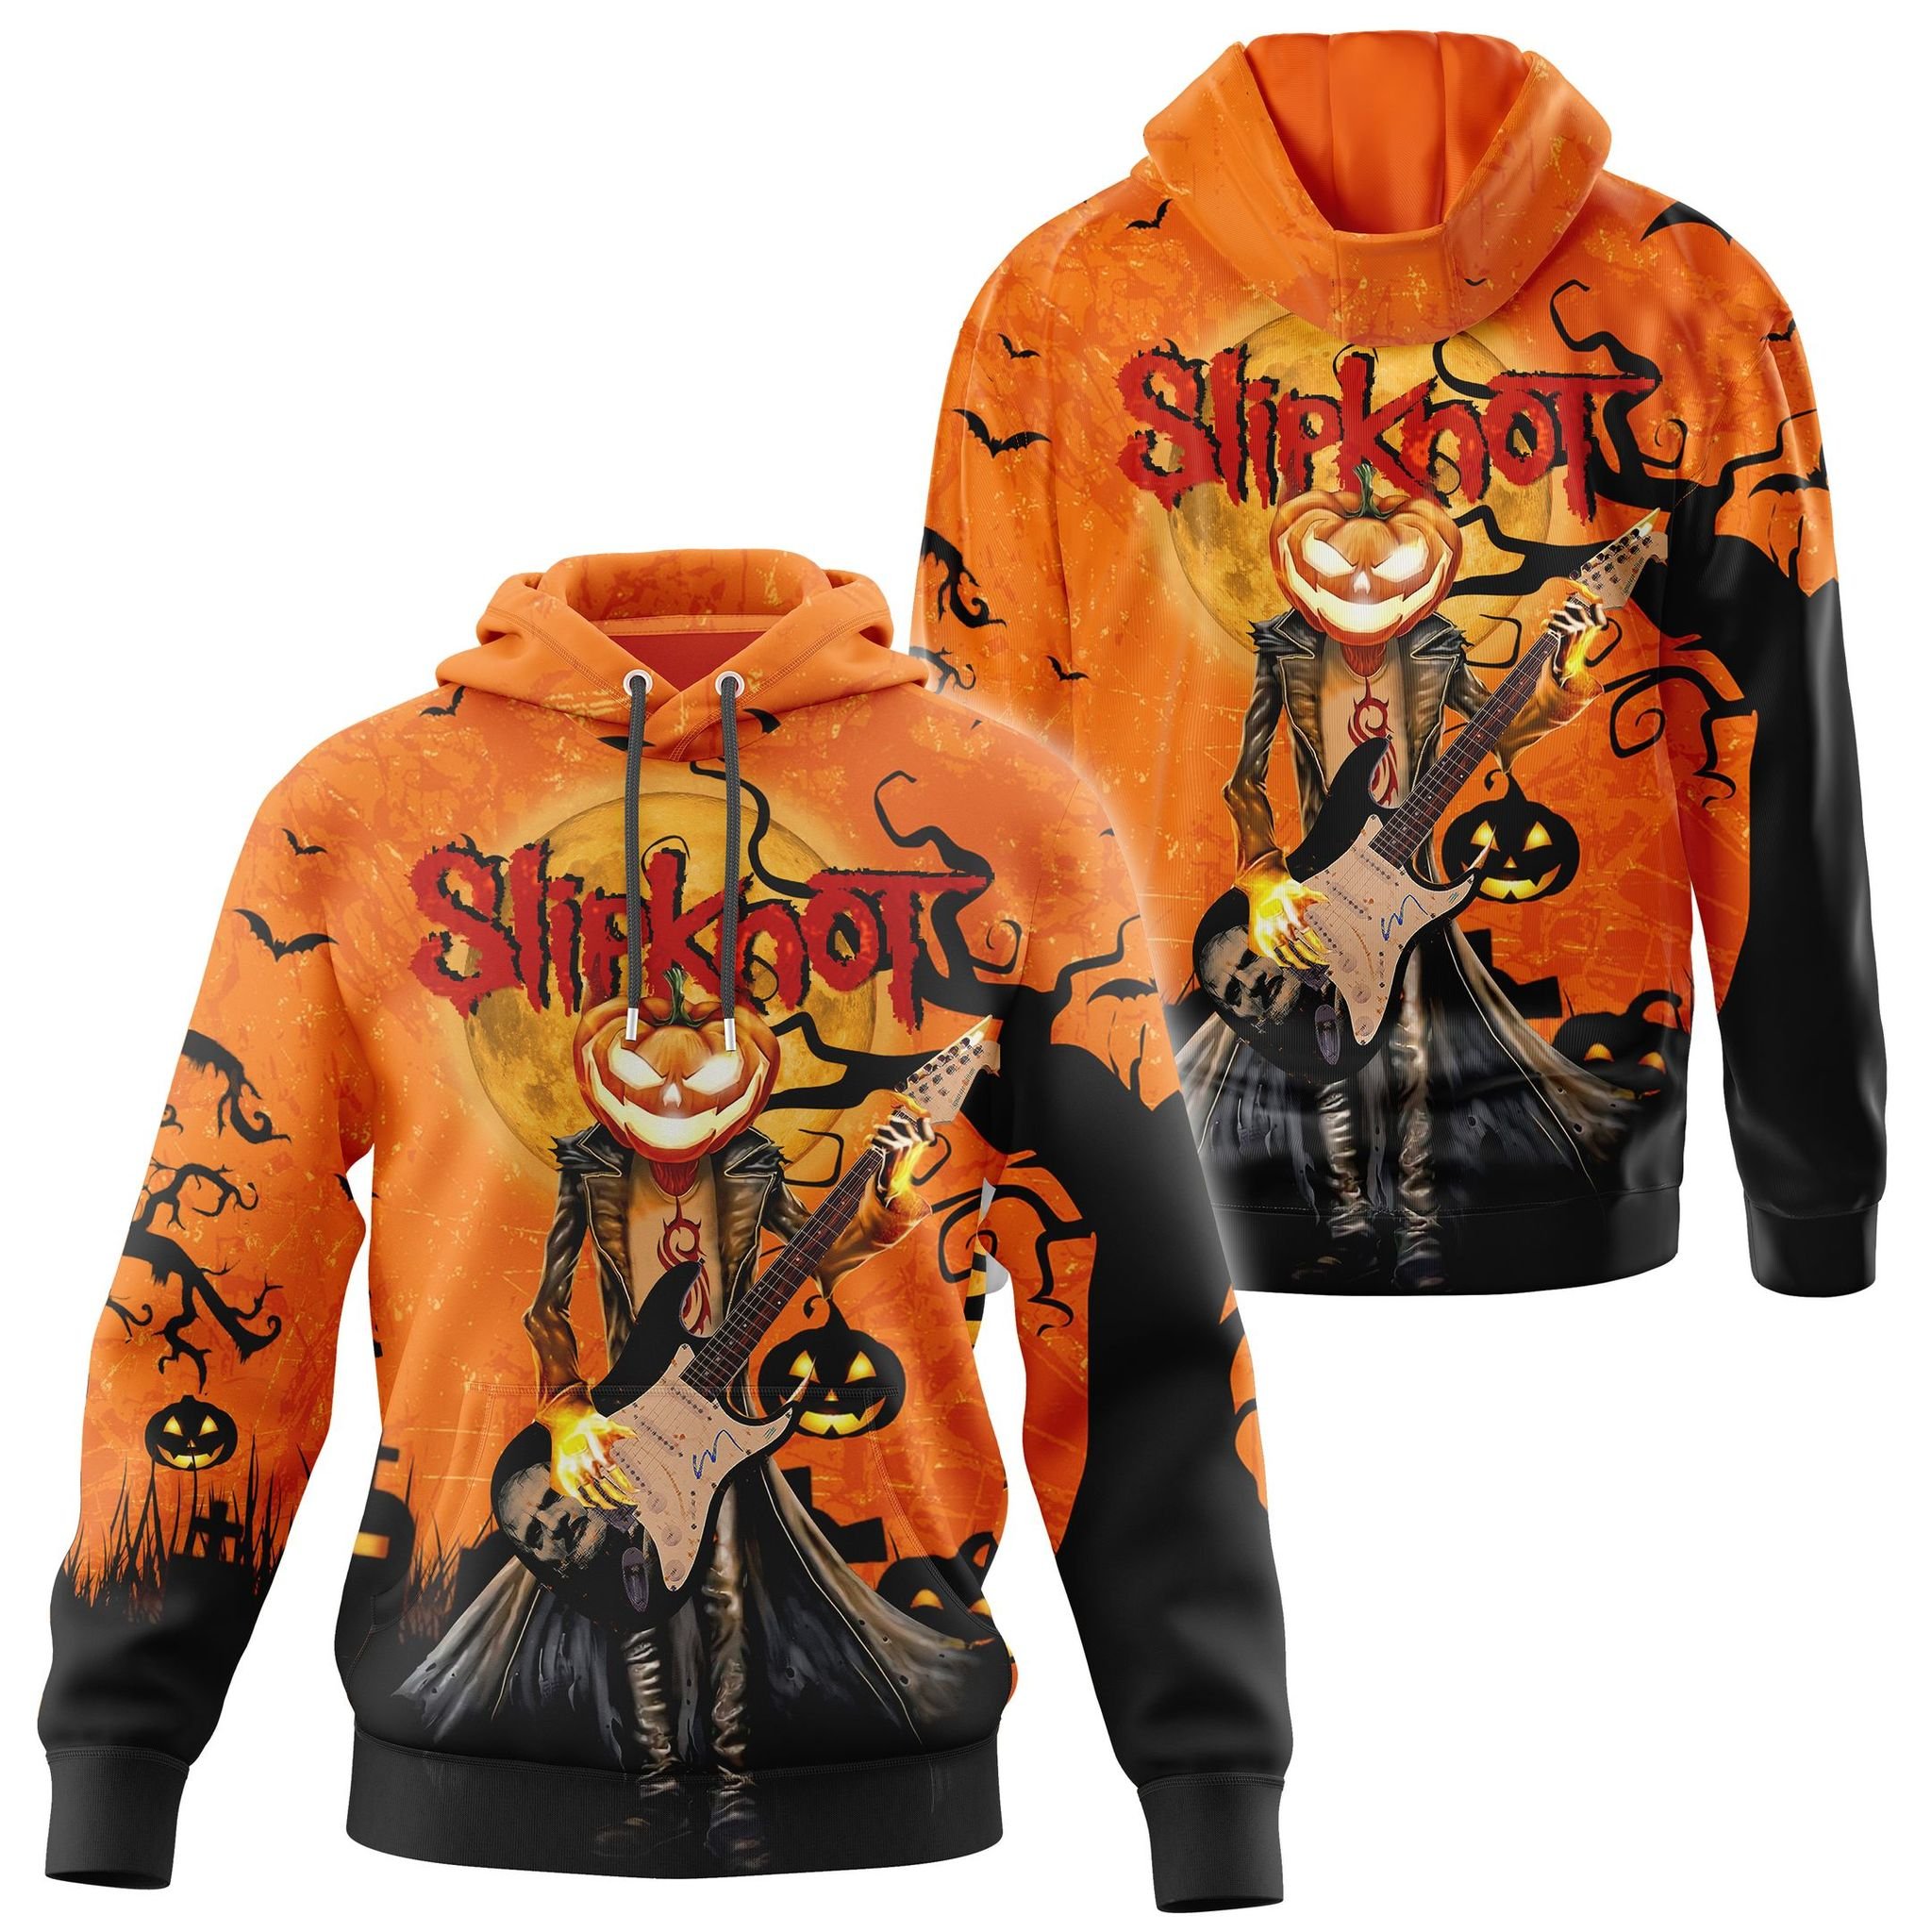 Slipknot Halloween 3d hoodie and shirt – LIMITED EDITION